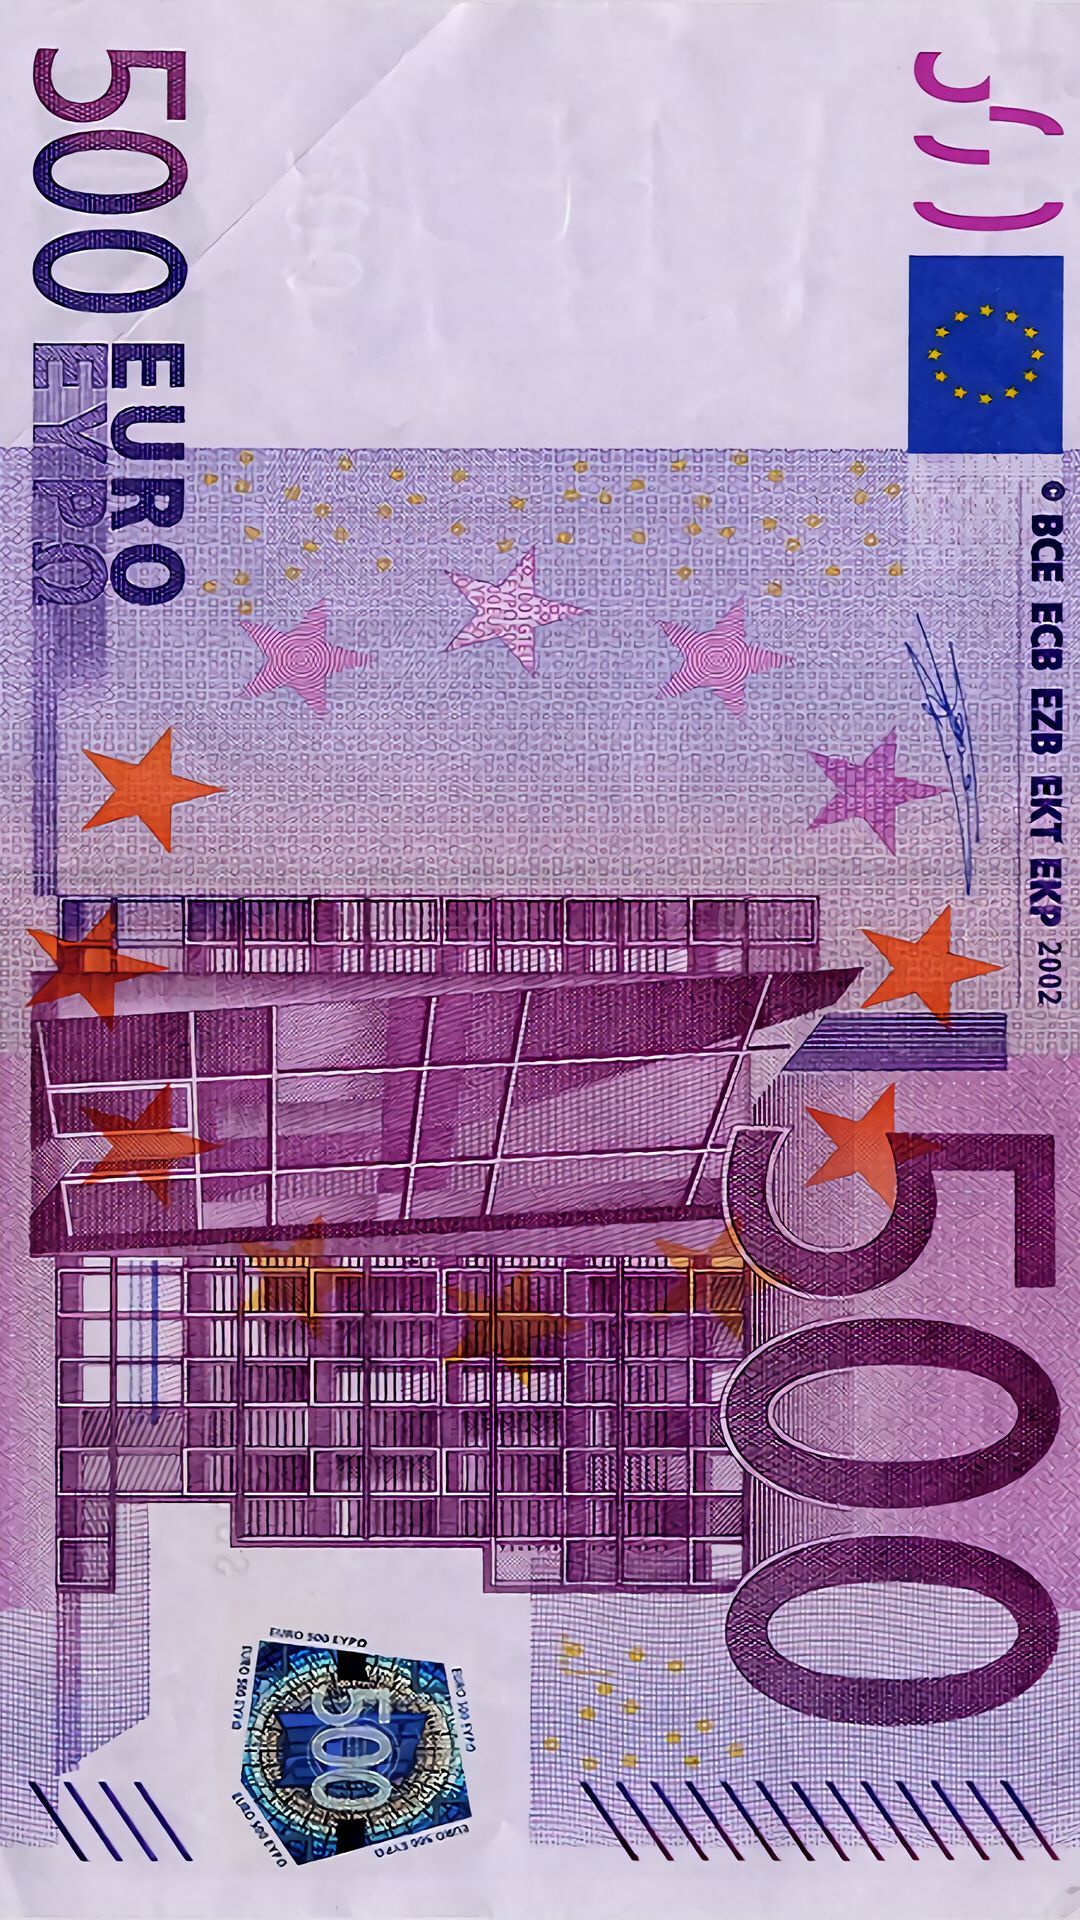 Euro. Money bill, Banknotes money, Paper currency